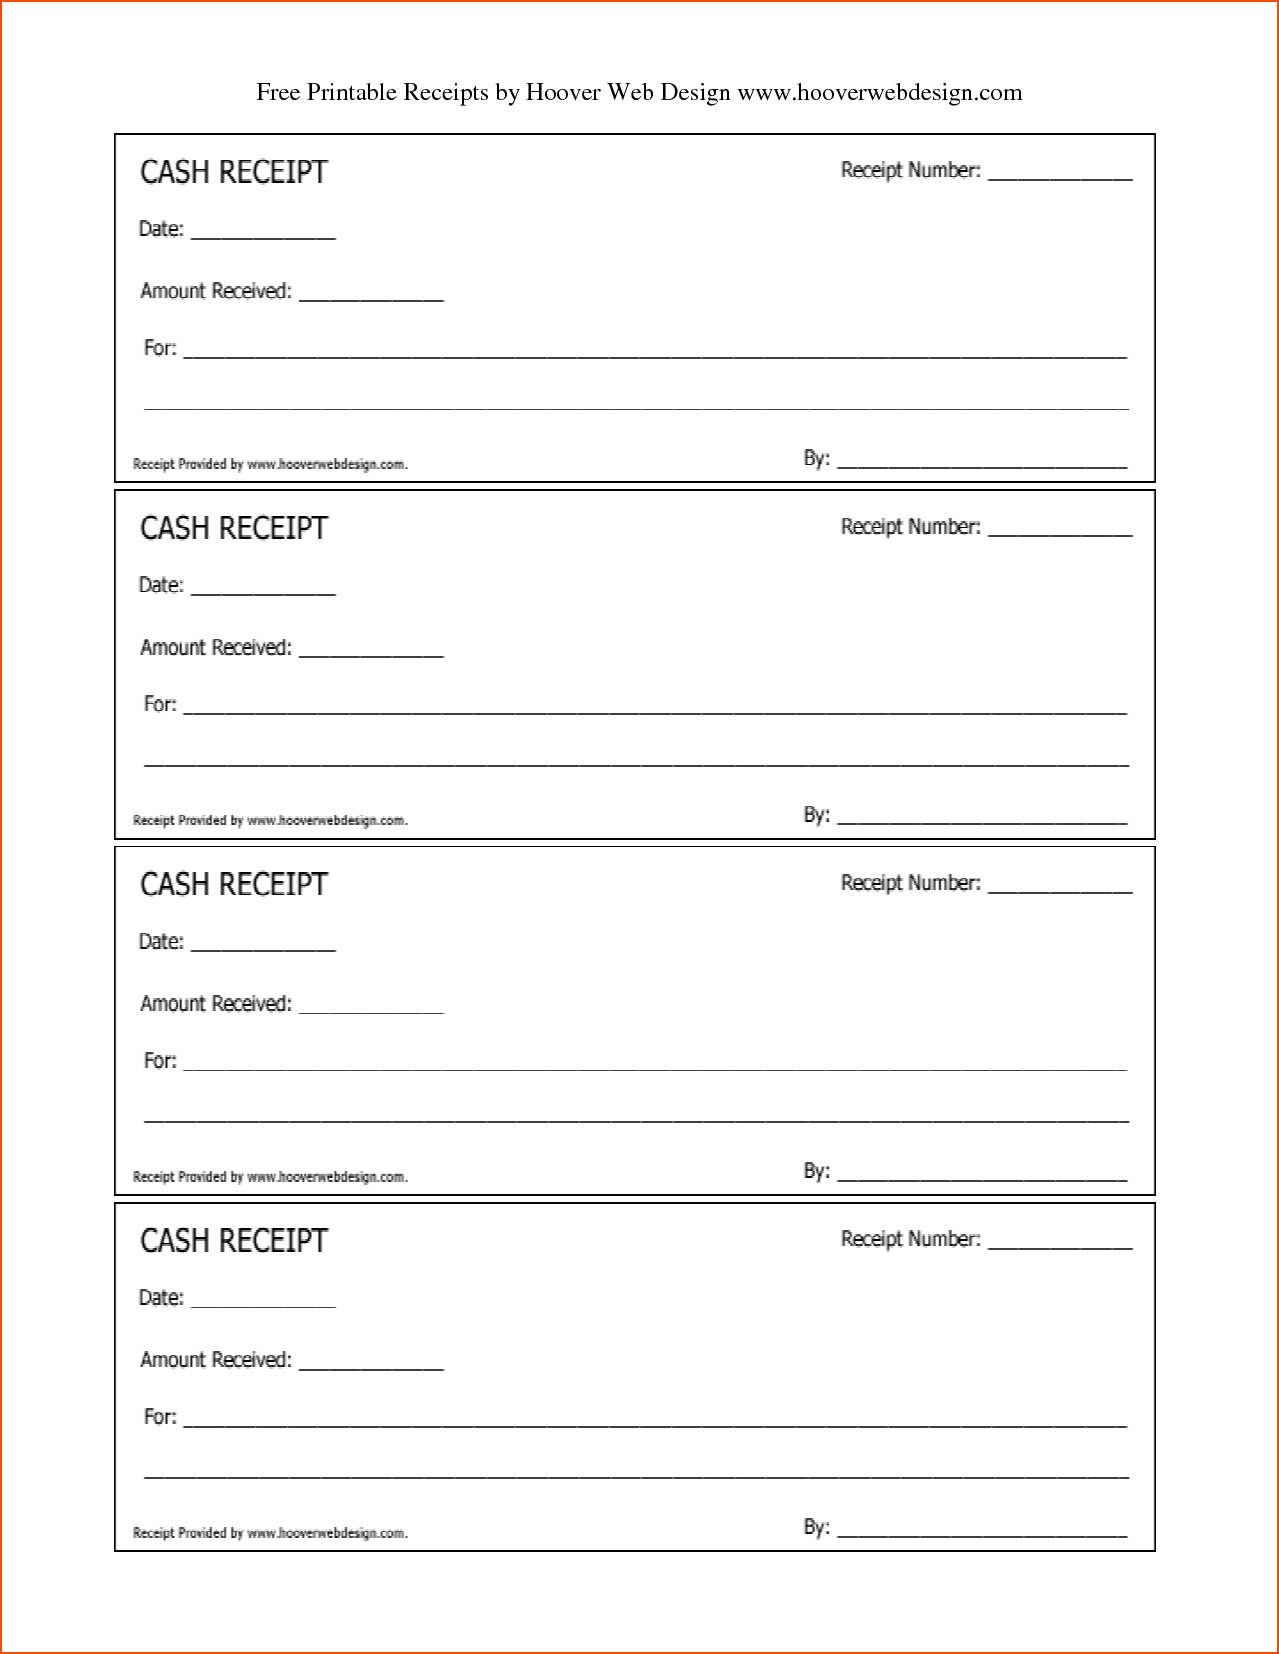 Cash Log Out Daily Cash Report Free Office Form Template Free Cash